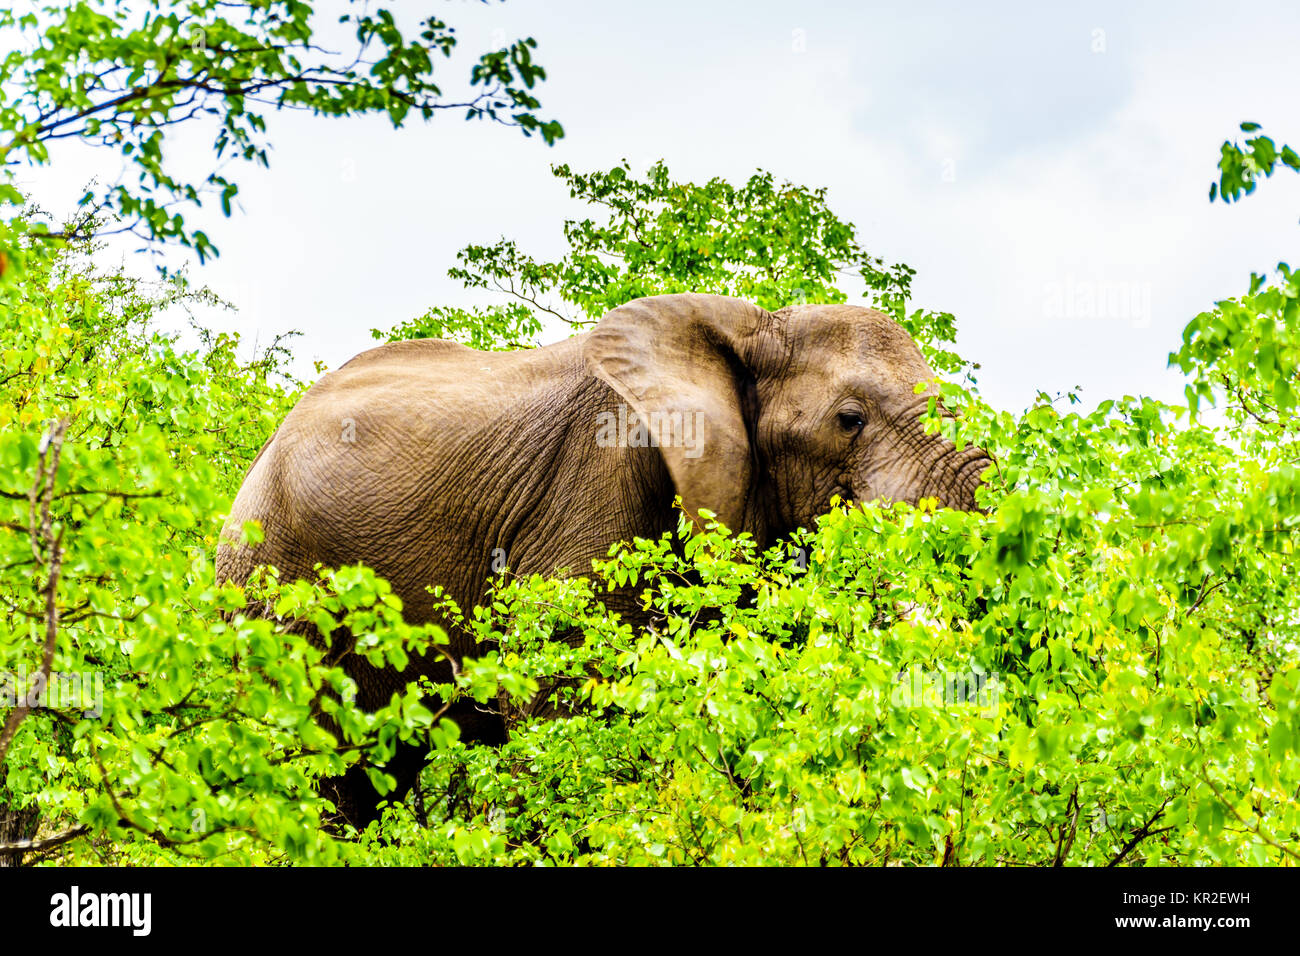 A large adult African Elephant eating leafs from Mopane Trees in a forest near Letaba in Kruger National Park, a large Nature Reserve in South Africa Stock Photo